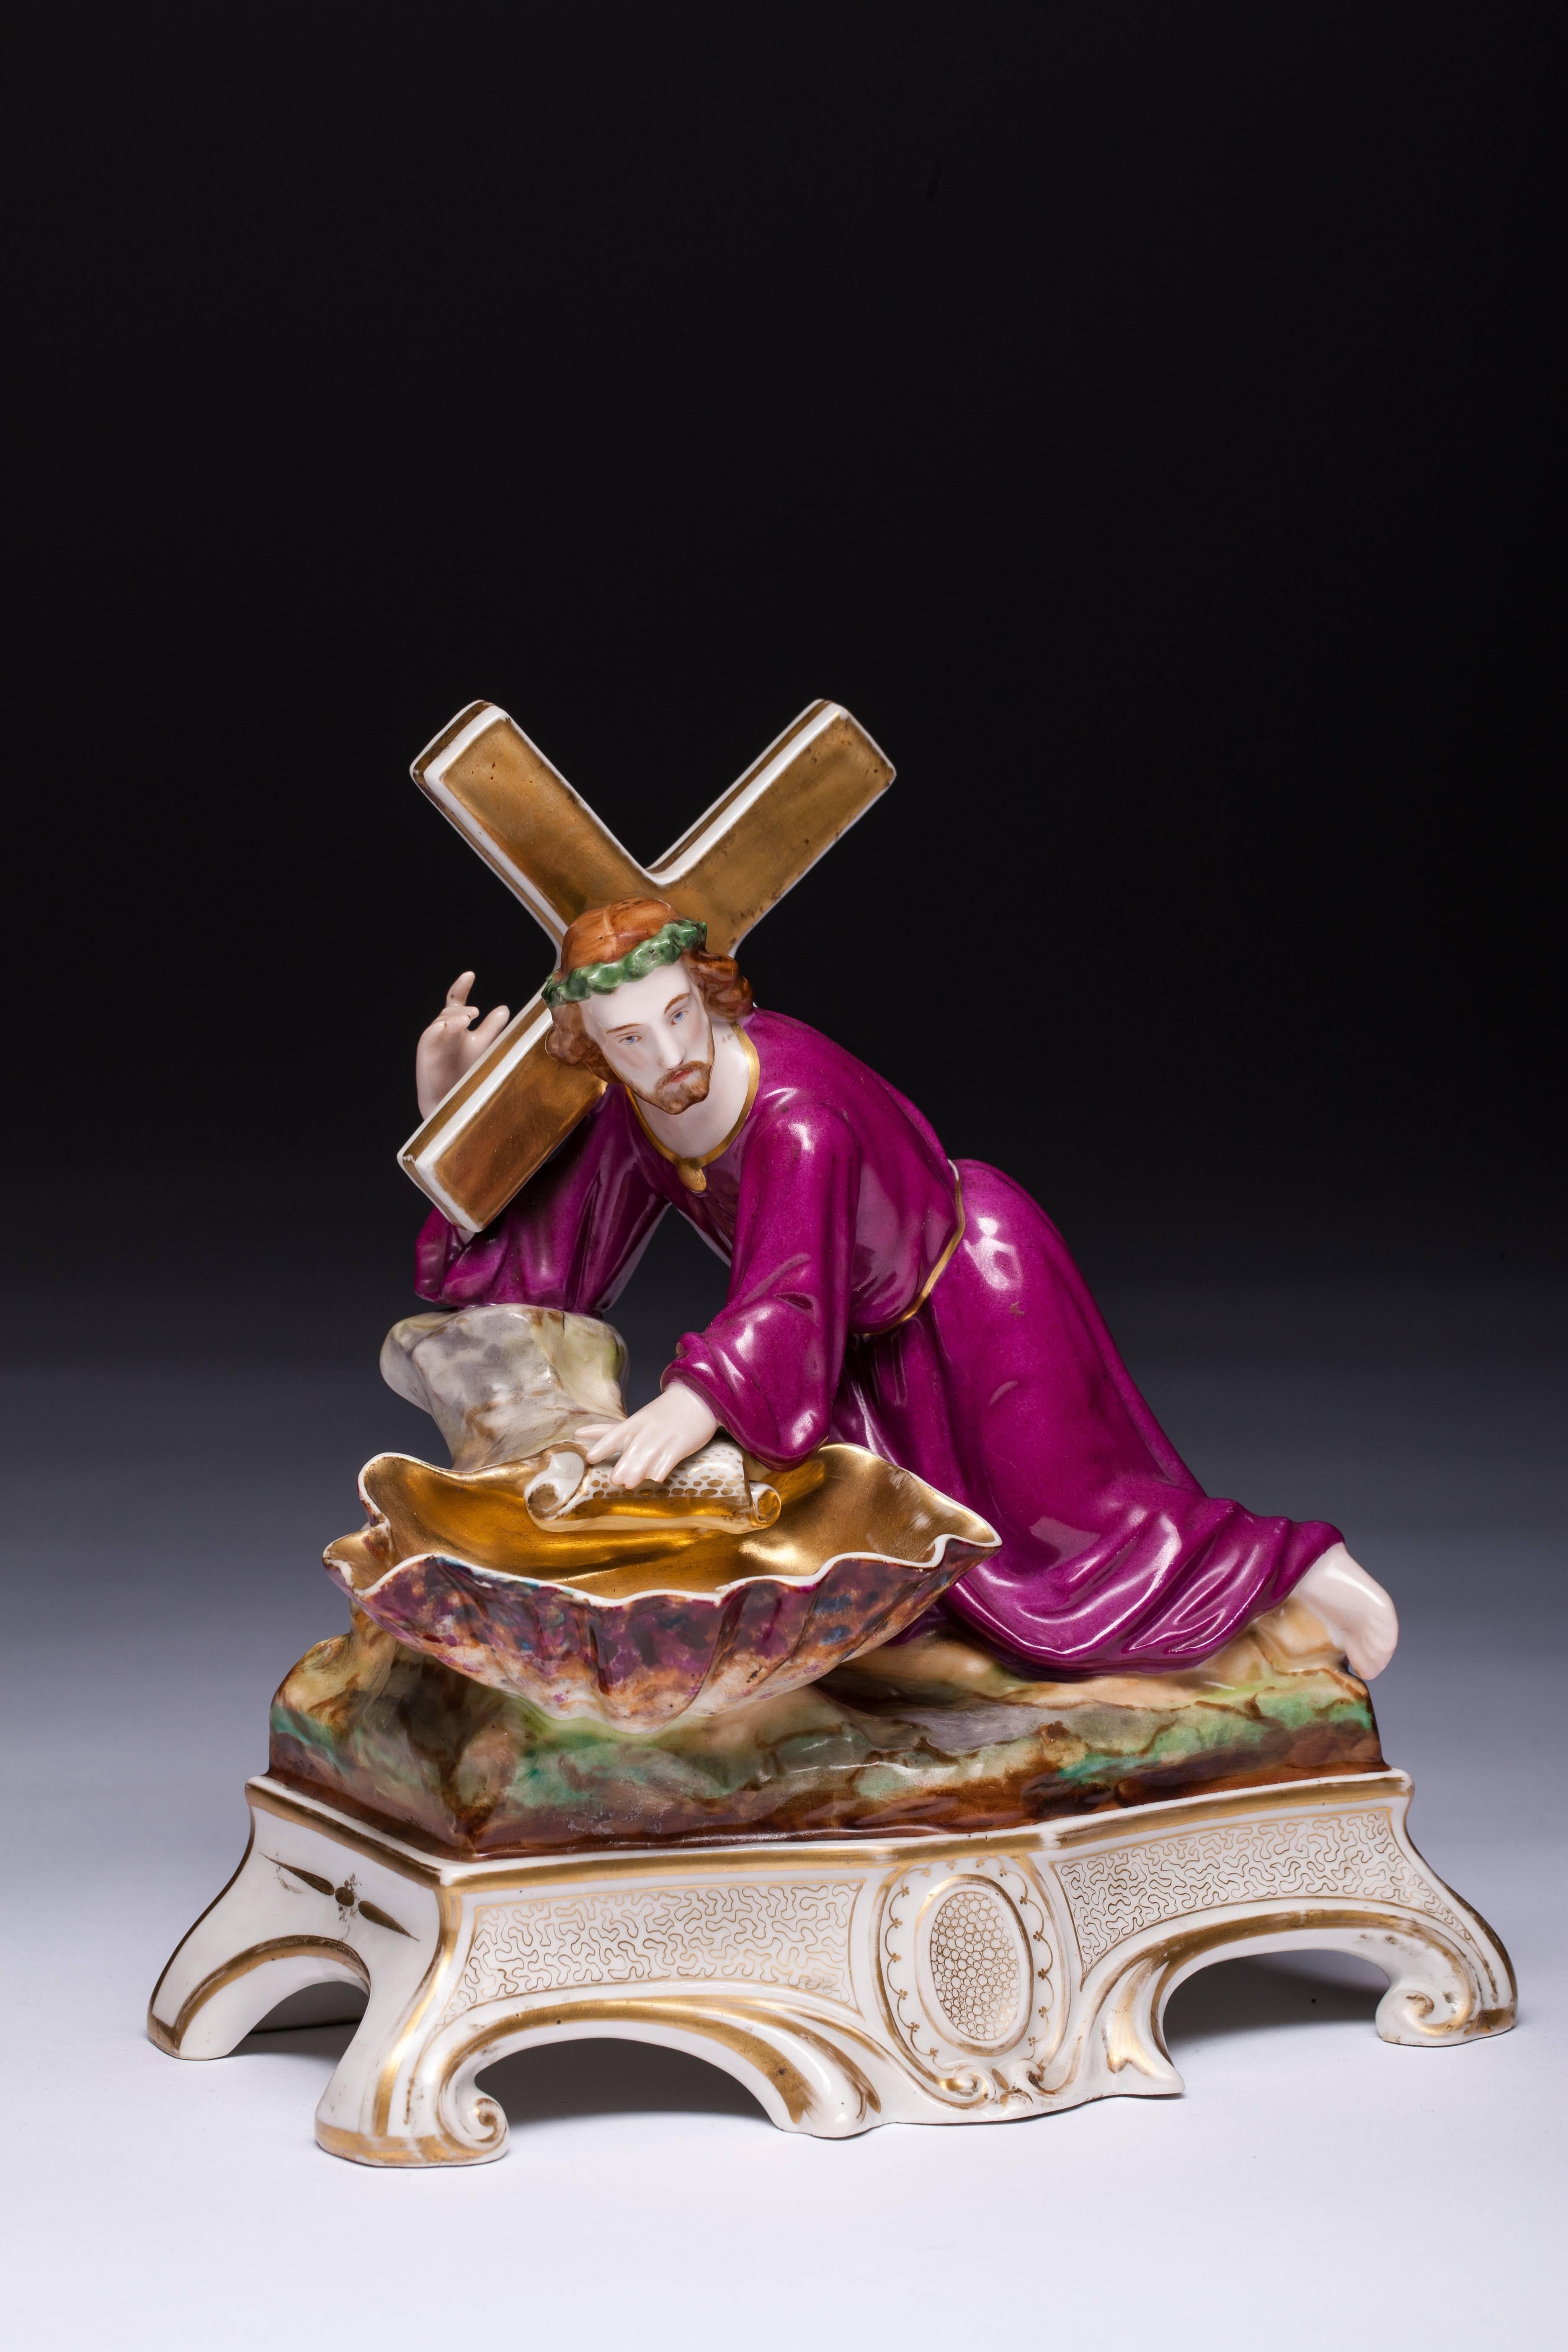 A stunning antique Vieux/Old Paris porcelain statue/holy water font depicting Jesus Christ carrying the Cross on his way to his crucifixion
 
Old Paris porcelain, also referred to as Vieux Paris, refers to the ornately-decorated gilt porcelain